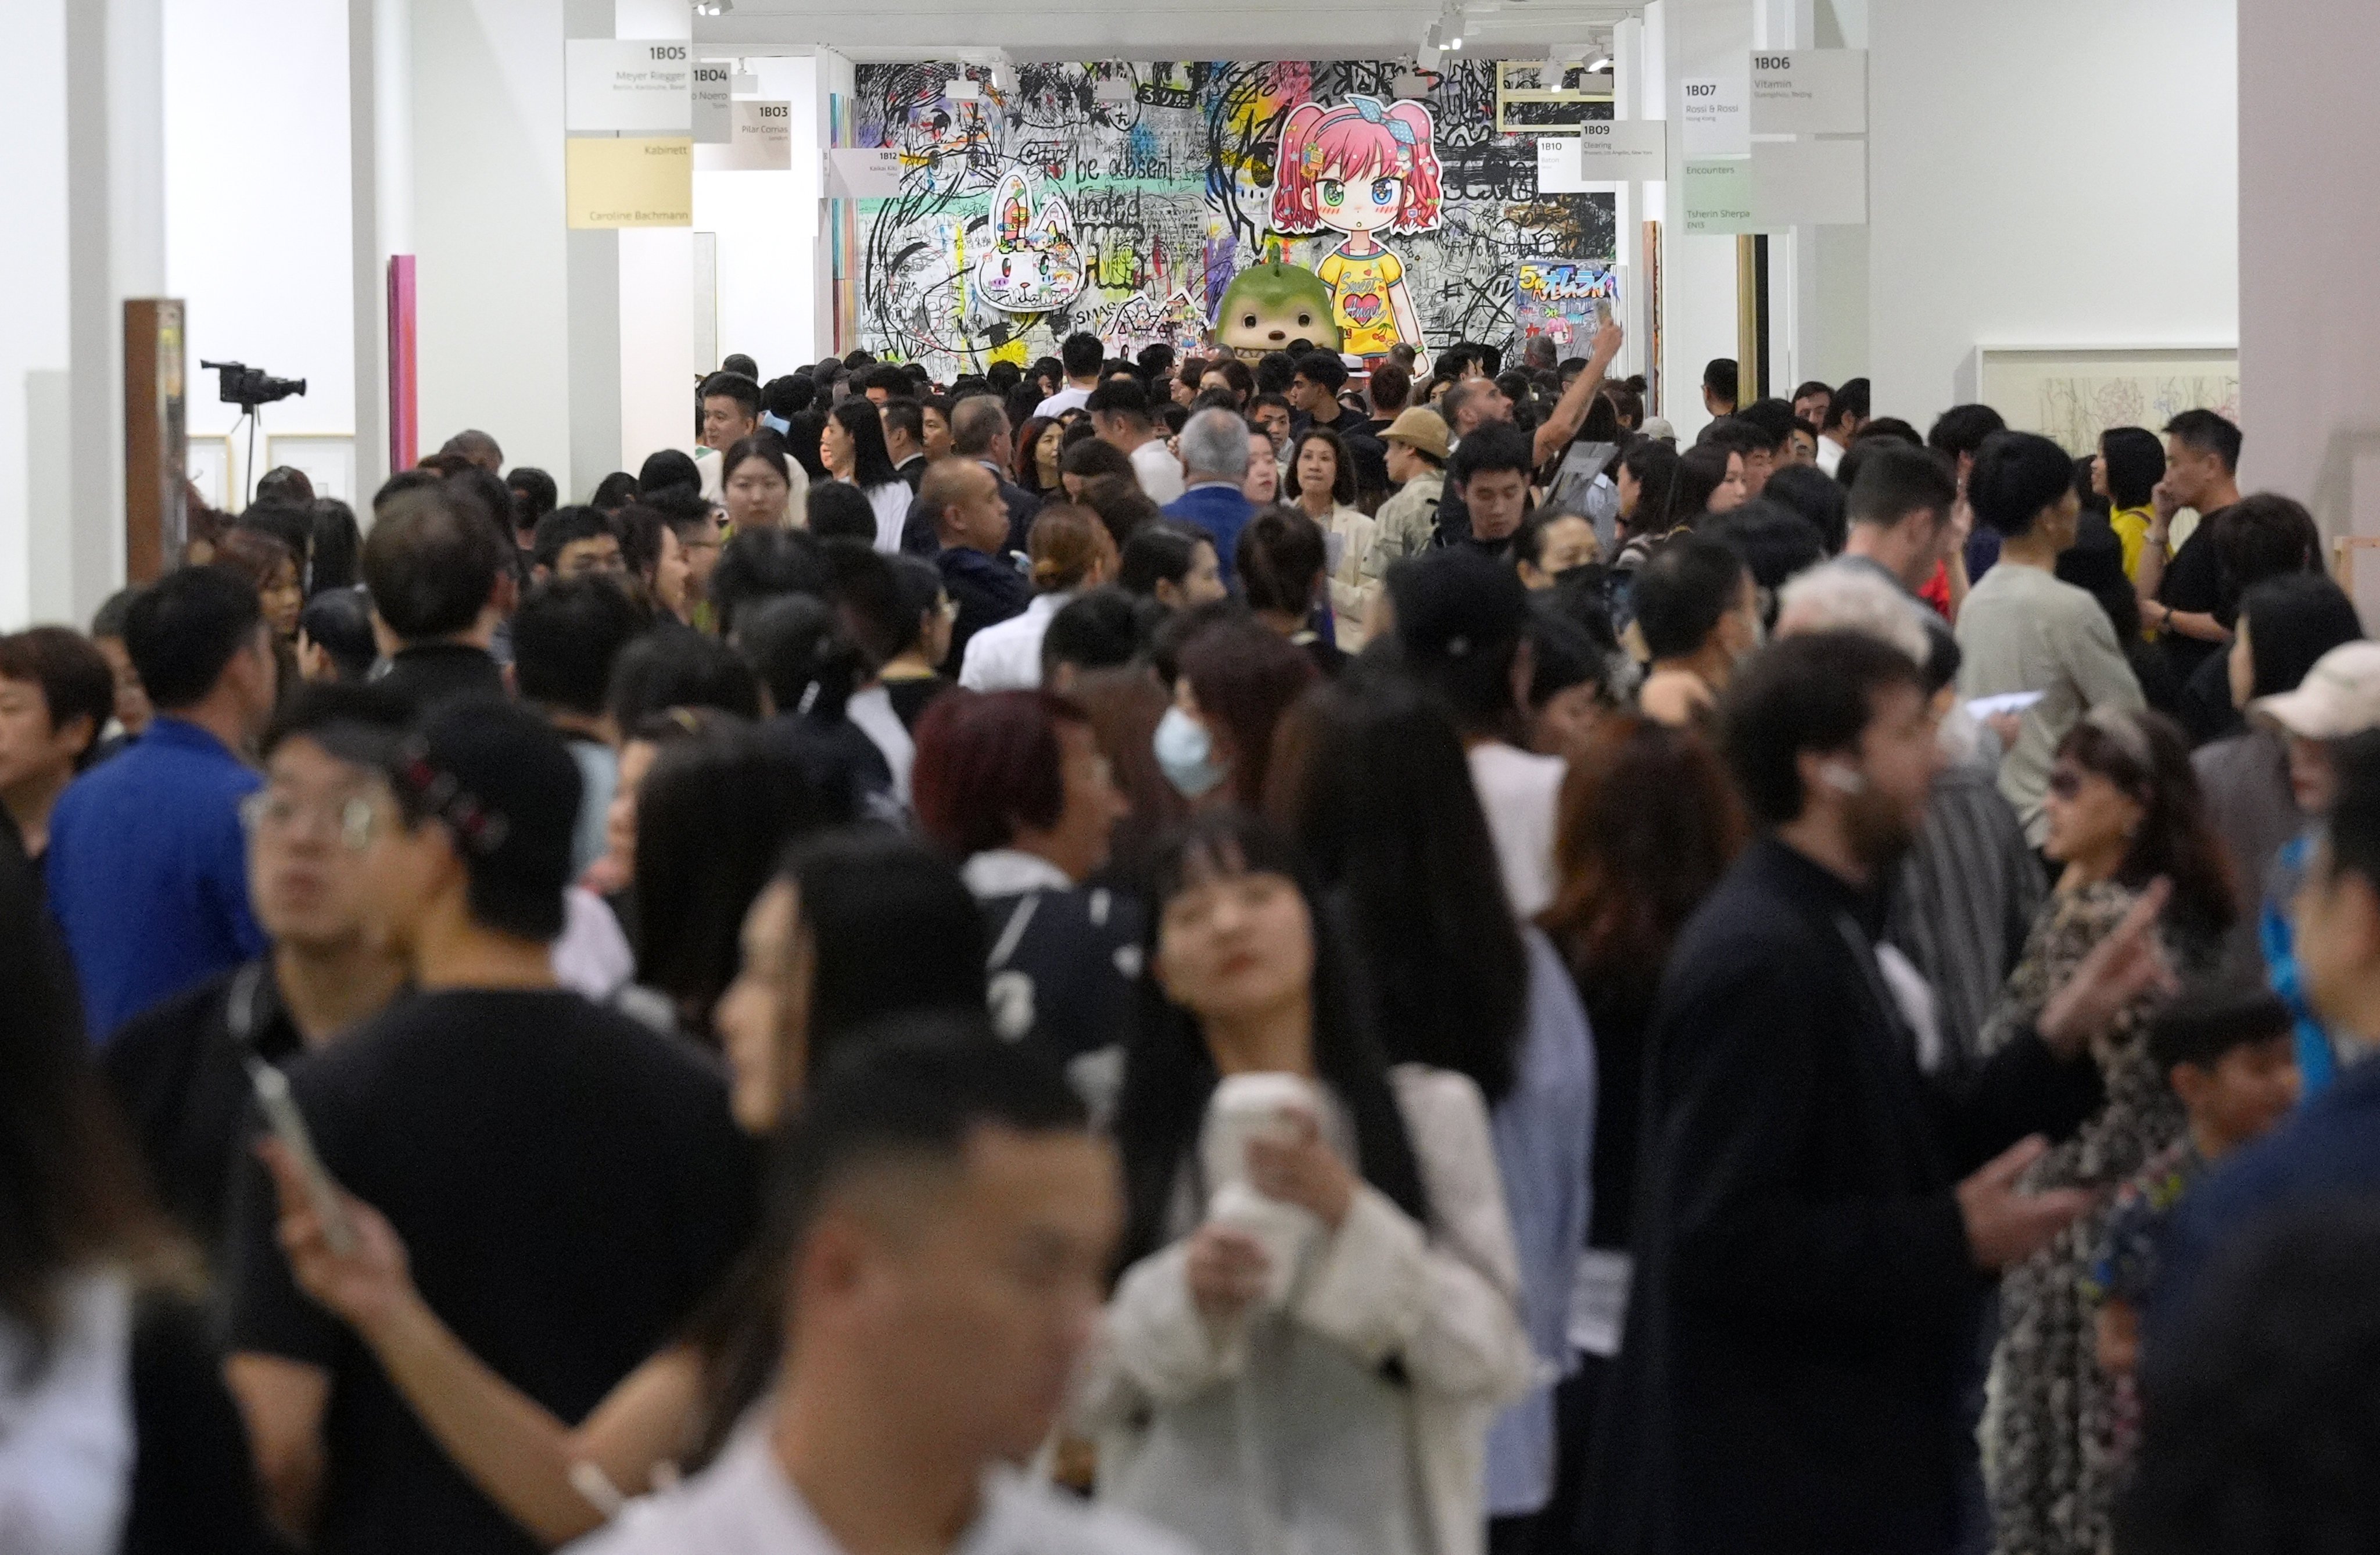 Visitors packed the Art Basel event at Hong Kong Convention and Exhibition Centre in Wan Chai on March 28. Photo: Eugene Lee